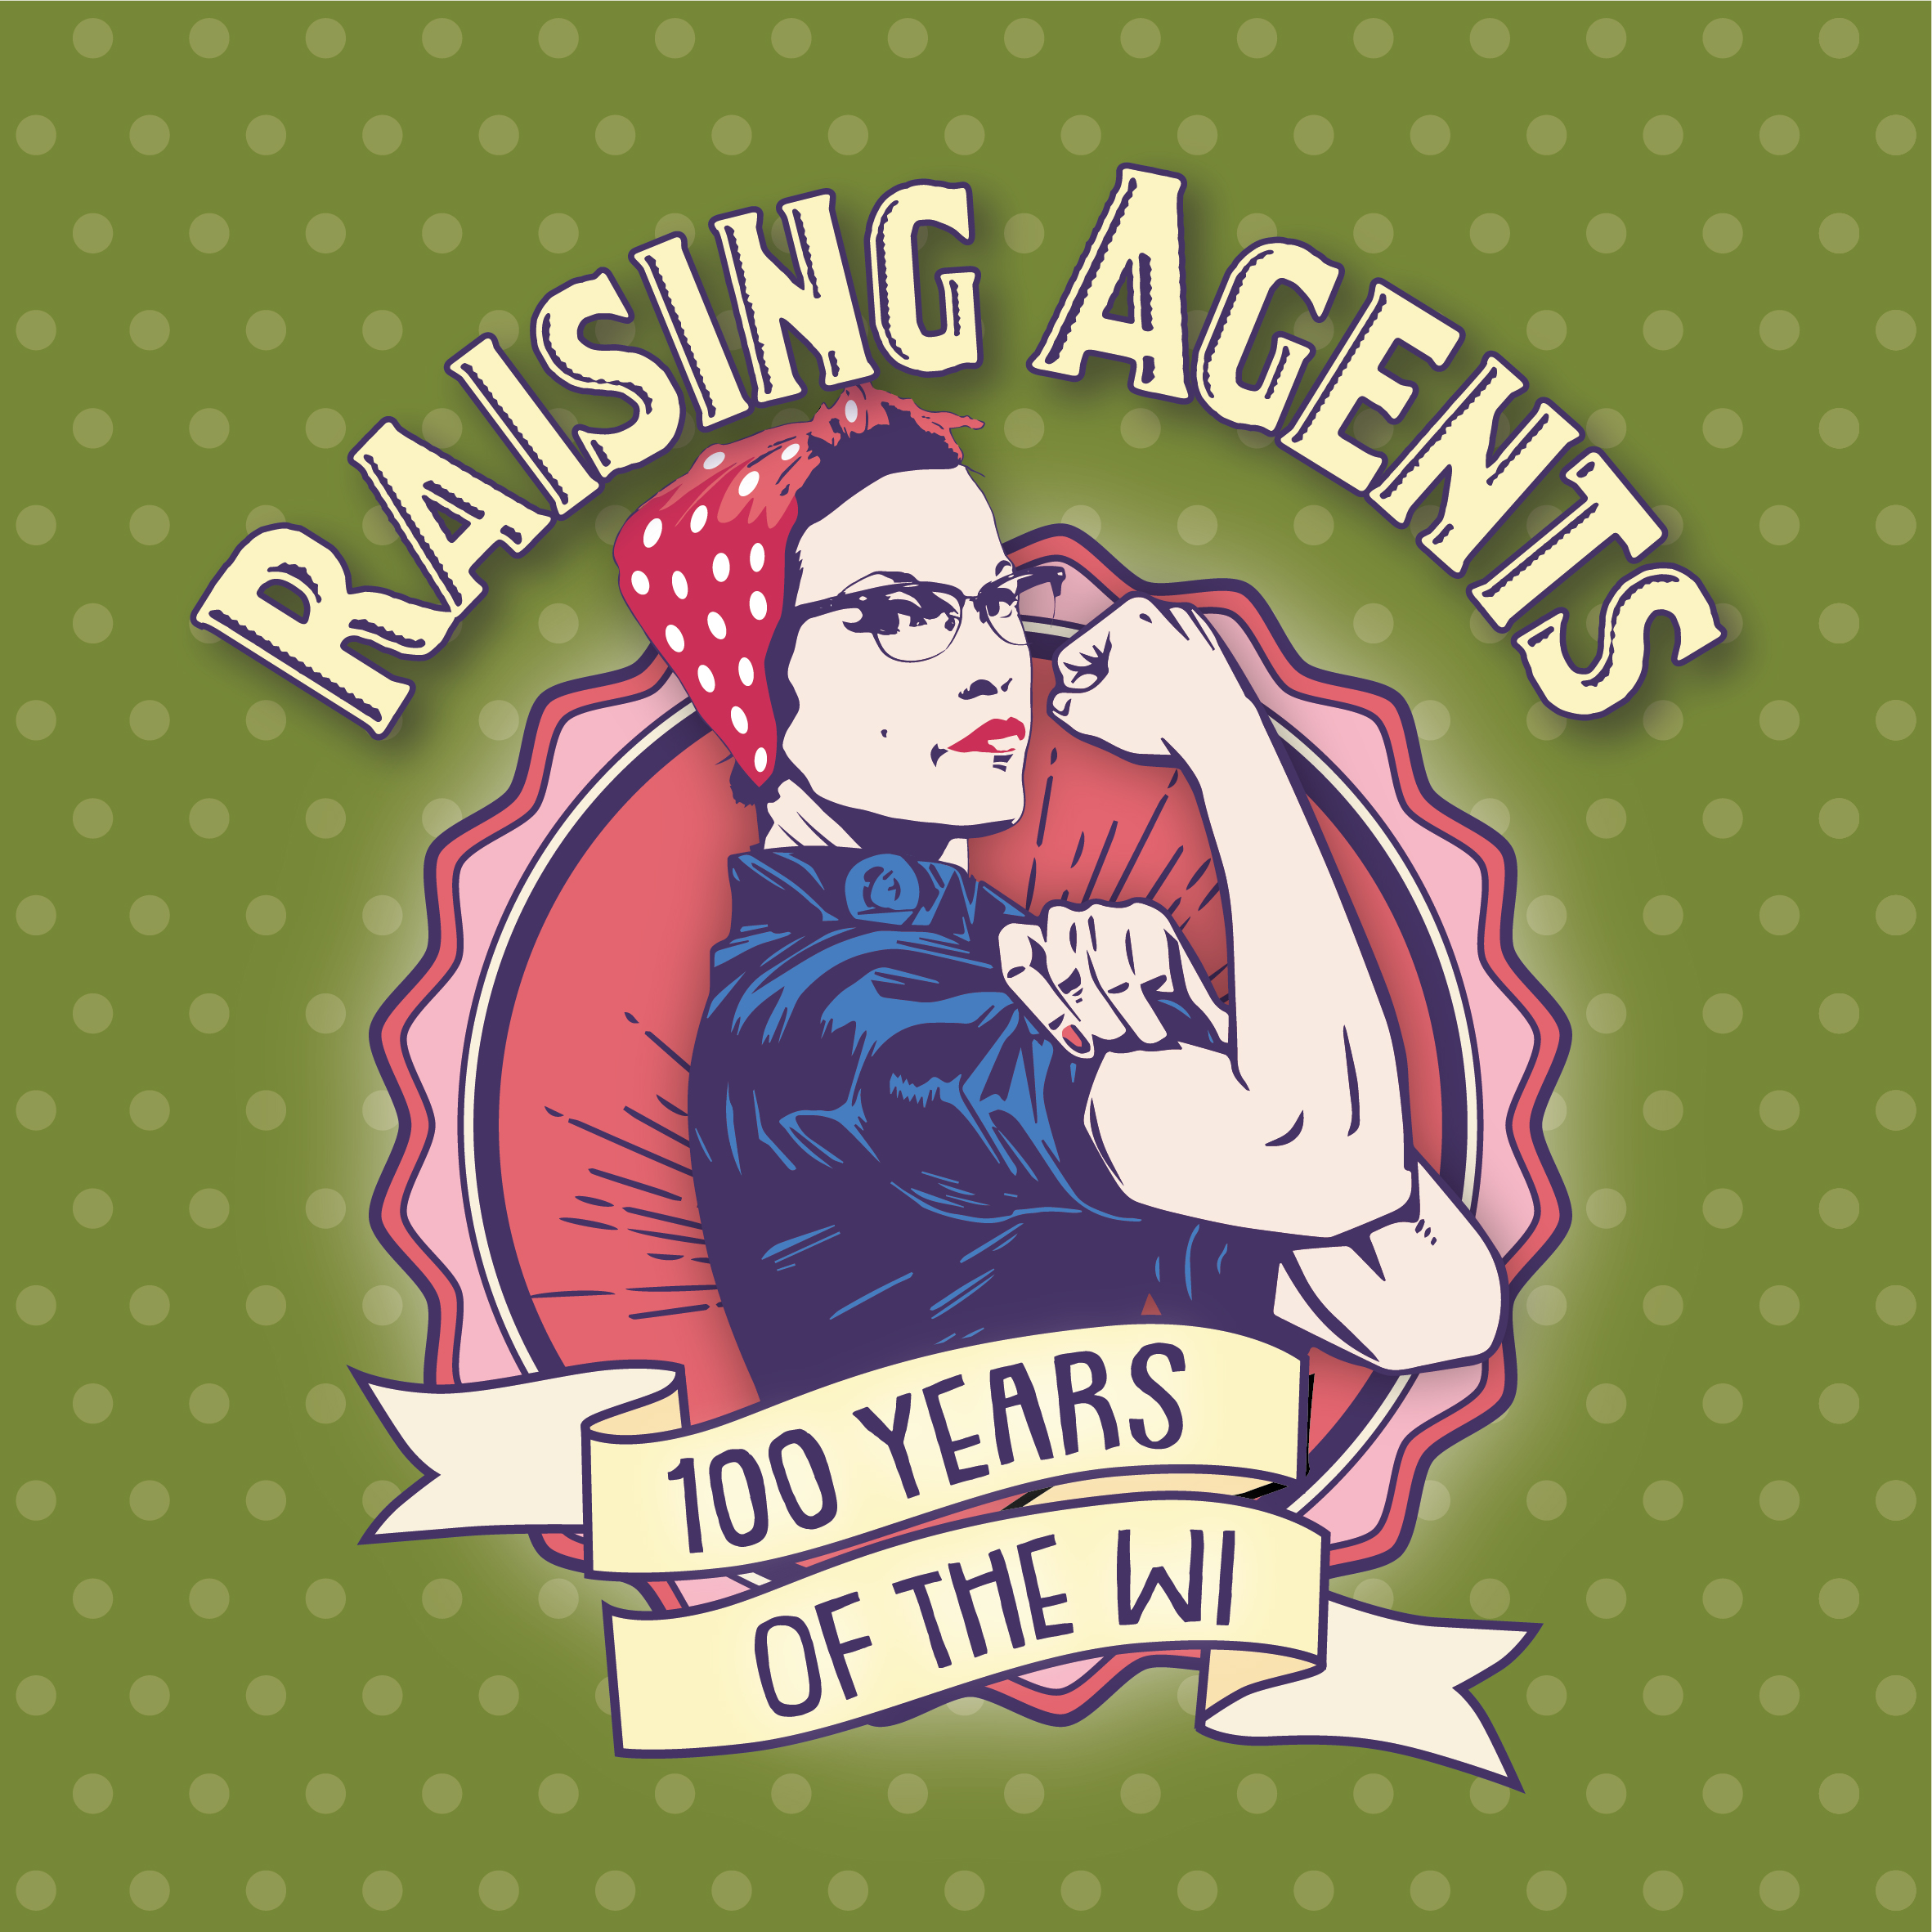 Raising Agents is a FREE live theatre experience at Ann et Vin